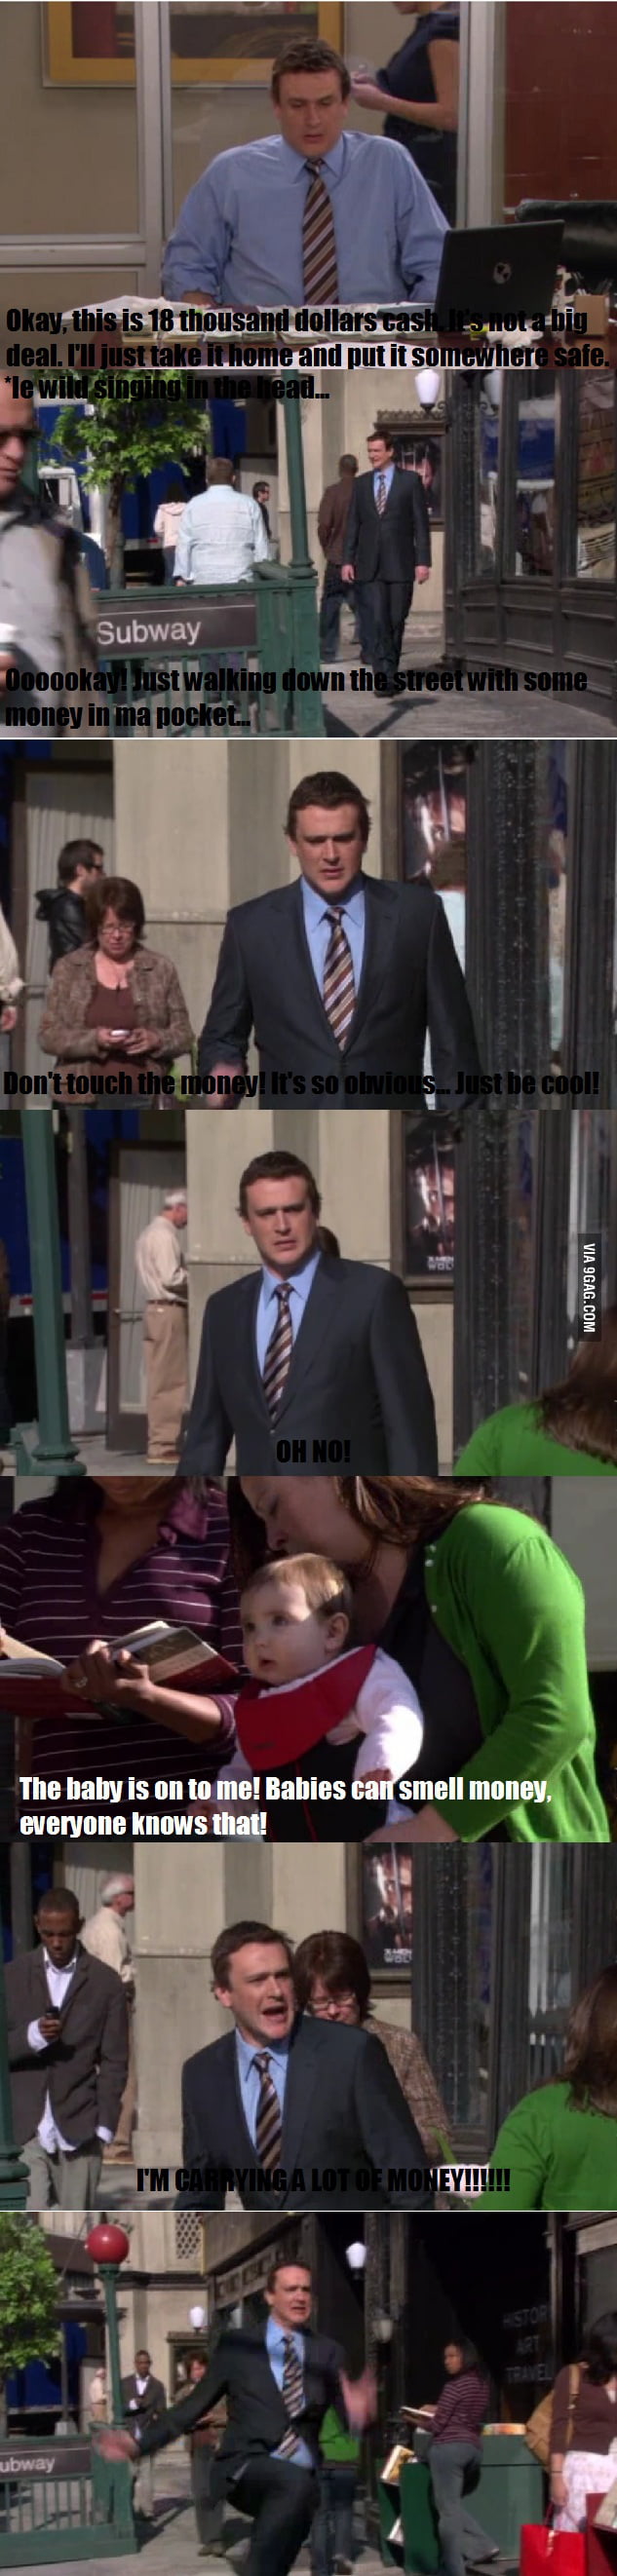 Just Marshall being Marshall with some money in his pocket - 9GAG